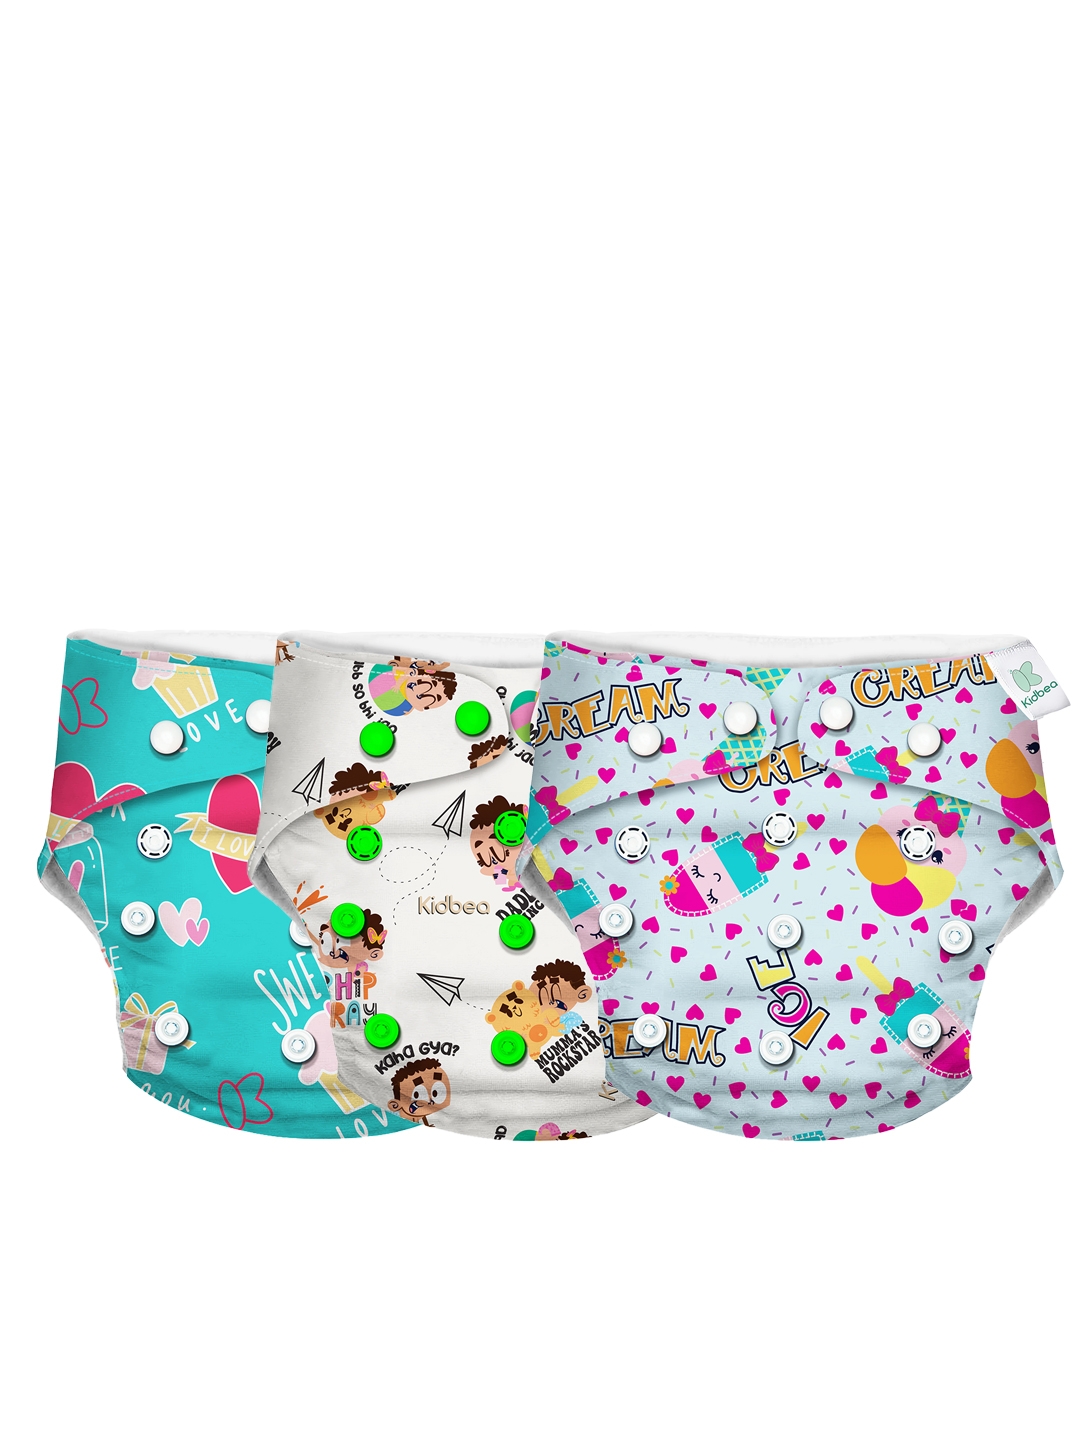 Kidbea | Kidbea Baby  All in One Washable Reusable Adjustable Cloth 3 Diapers with 3 Inserts -Assorted